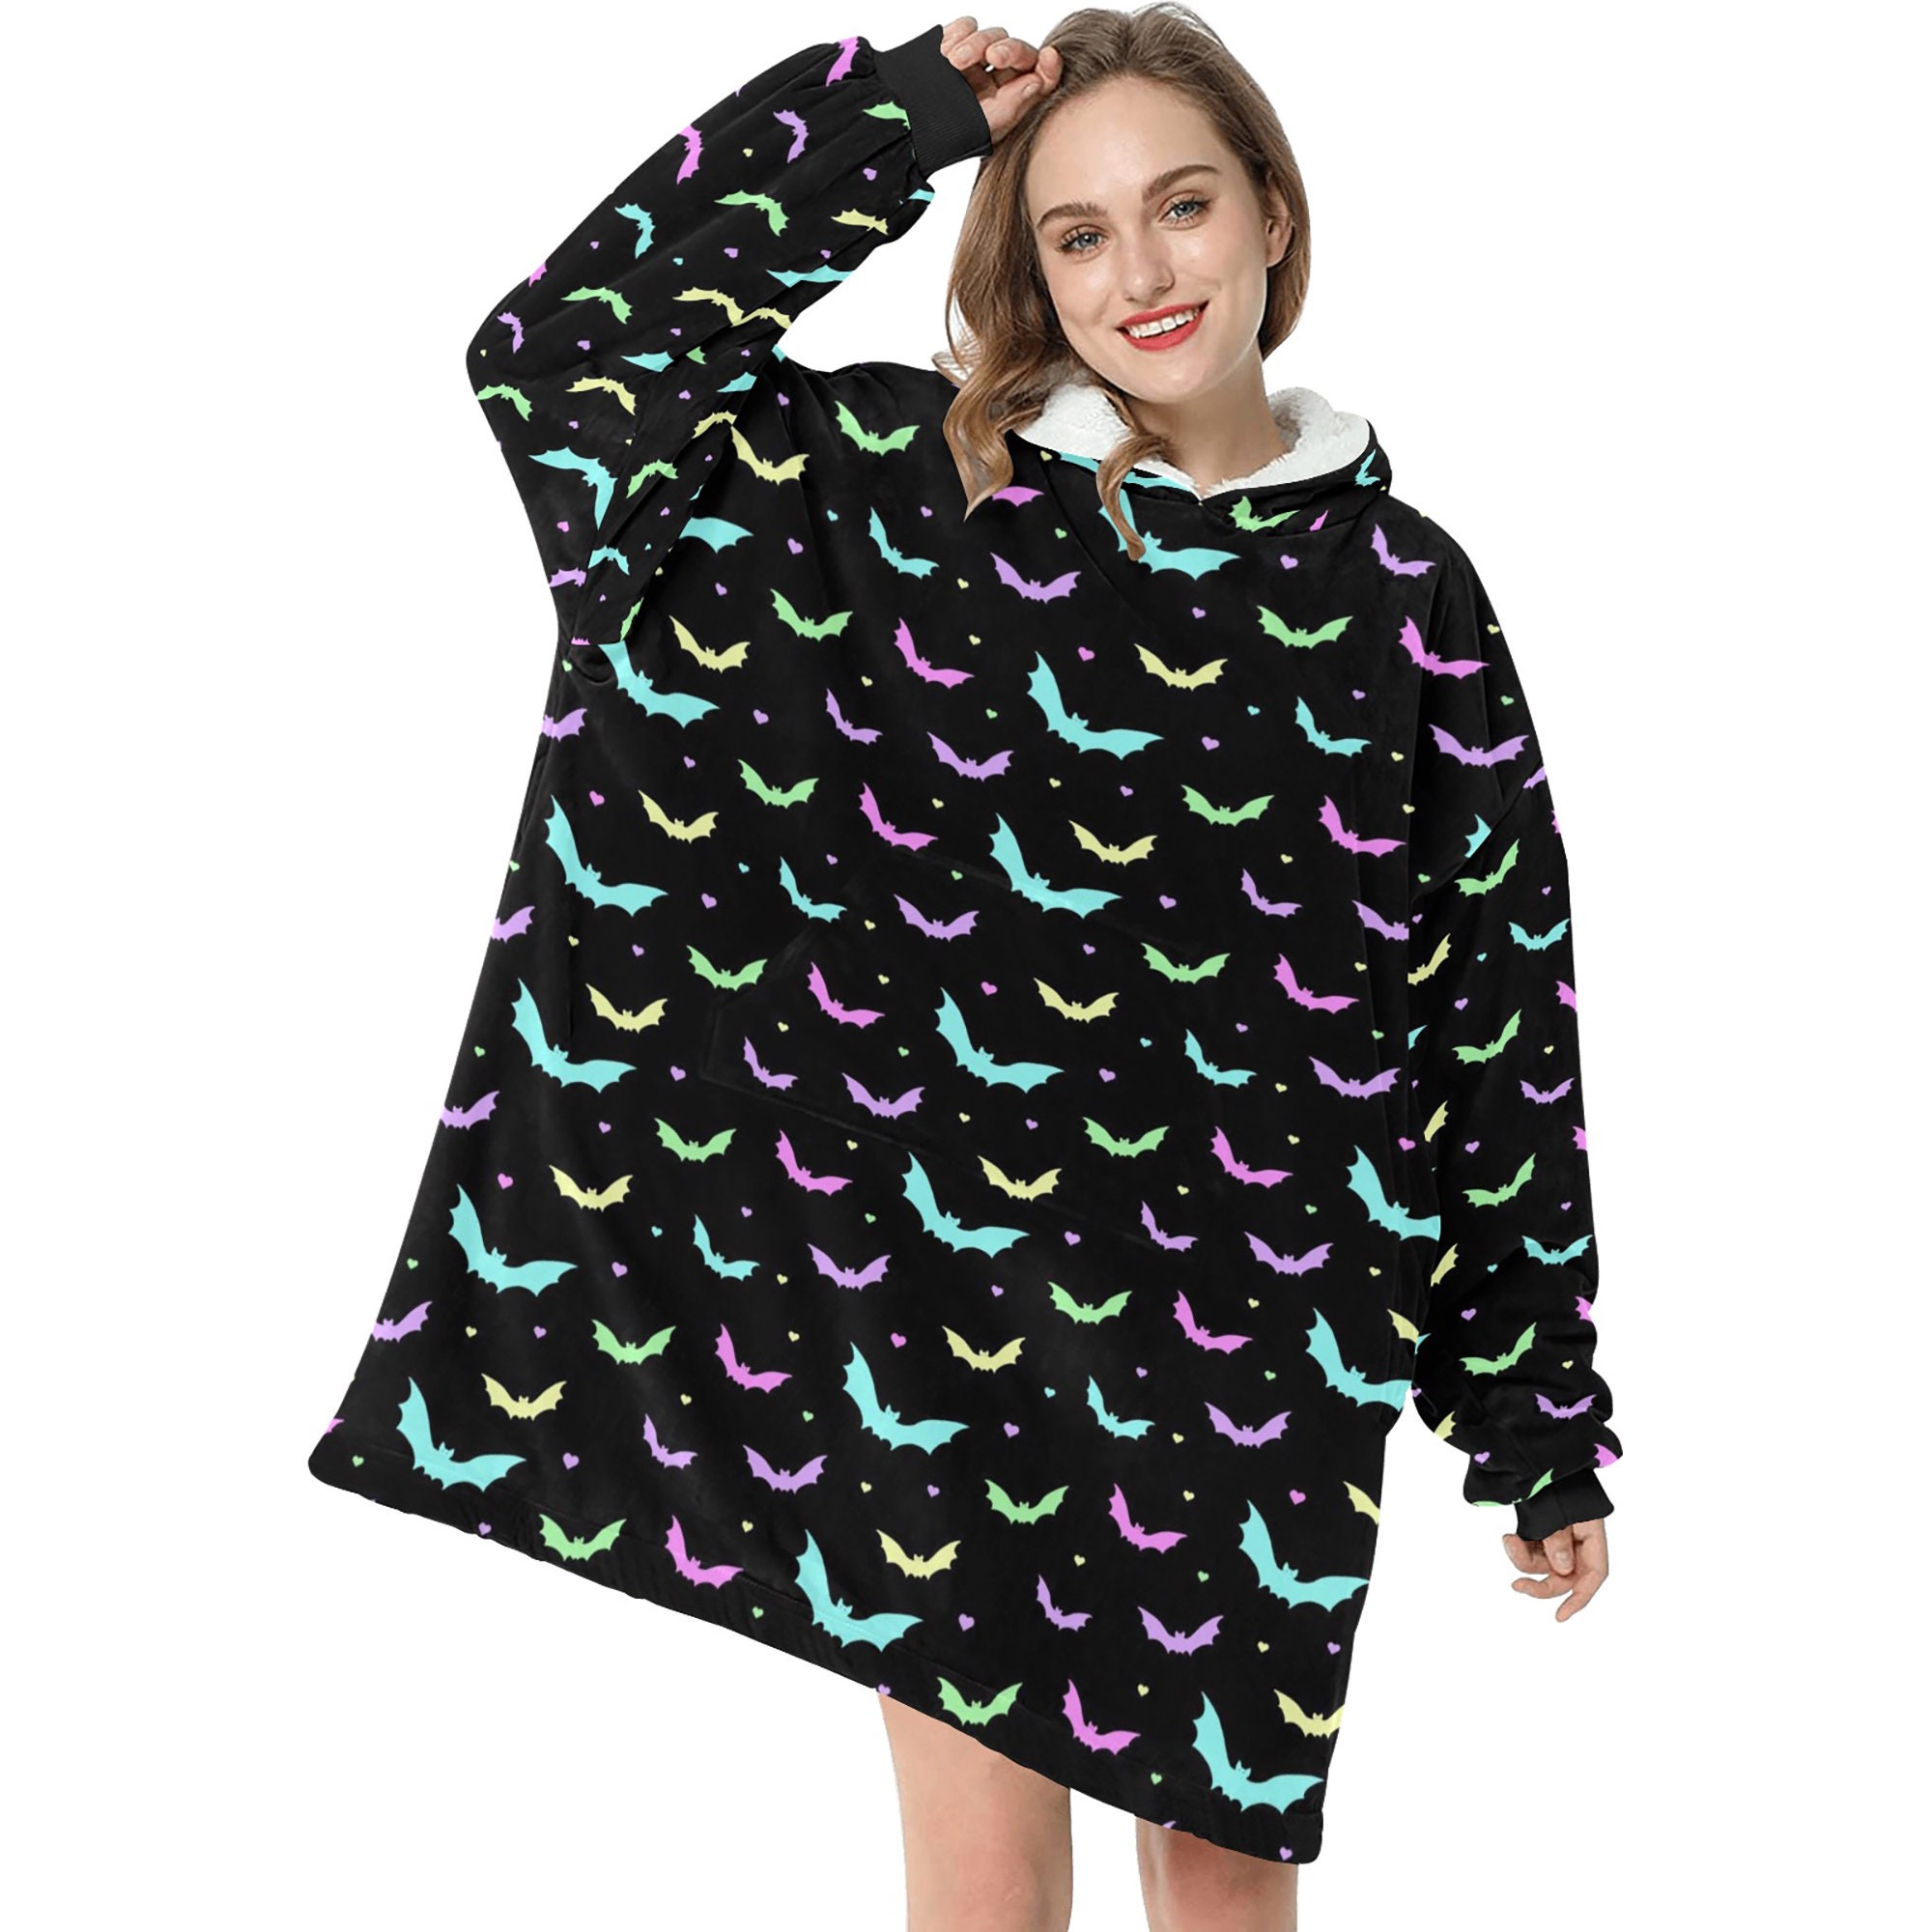 Discover Pastel Goth Bats Spooky Halloween Theme Blanket Hooded Jumper Hoodie Winter Oversized Kids Adults